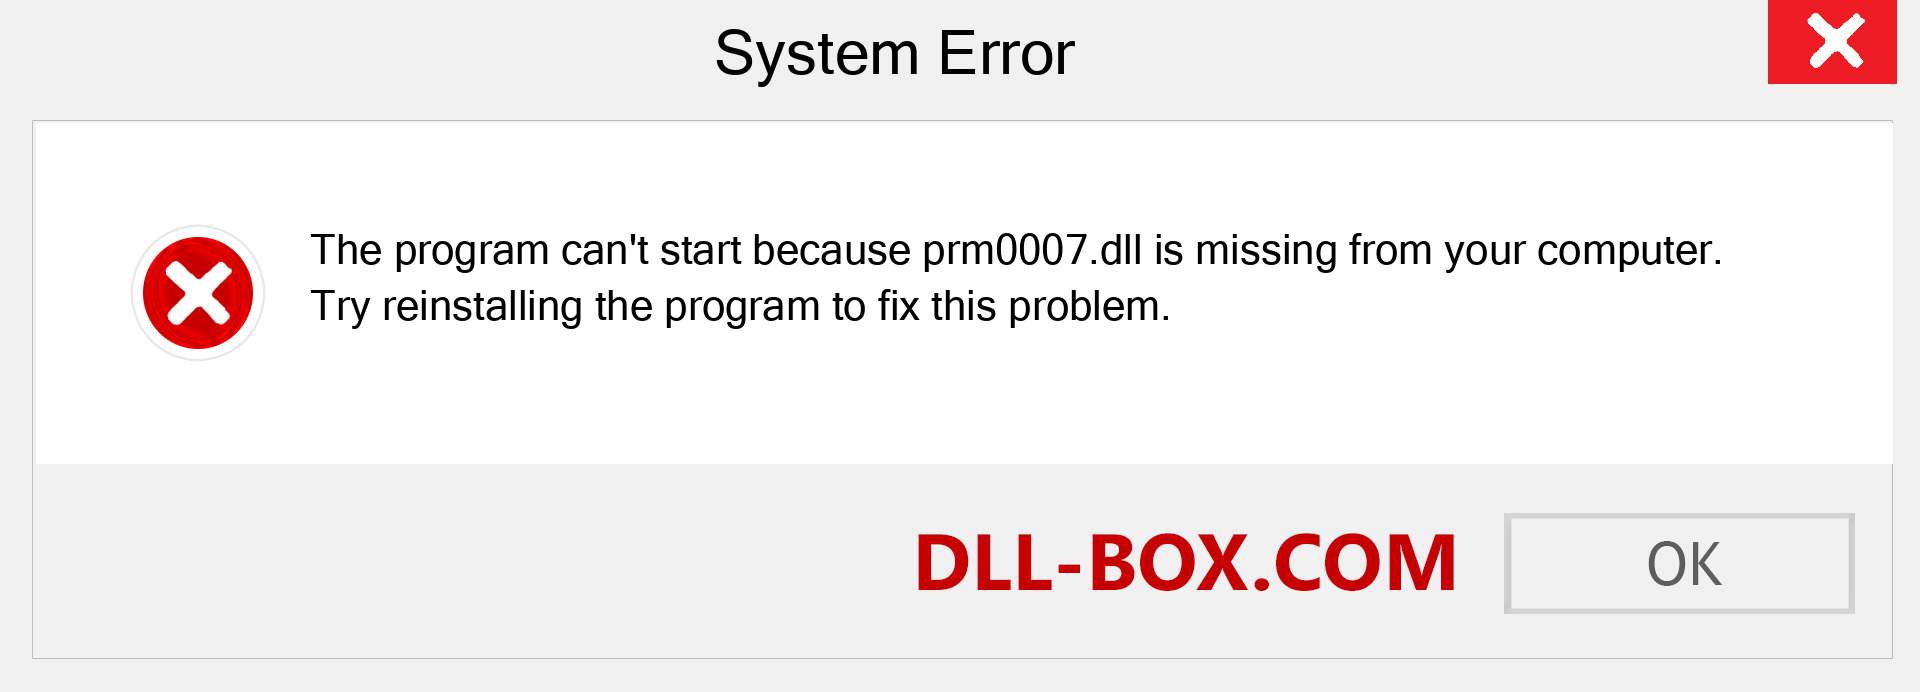  prm0007.dll file is missing?. Download for Windows 7, 8, 10 - Fix  prm0007 dll Missing Error on Windows, photos, images